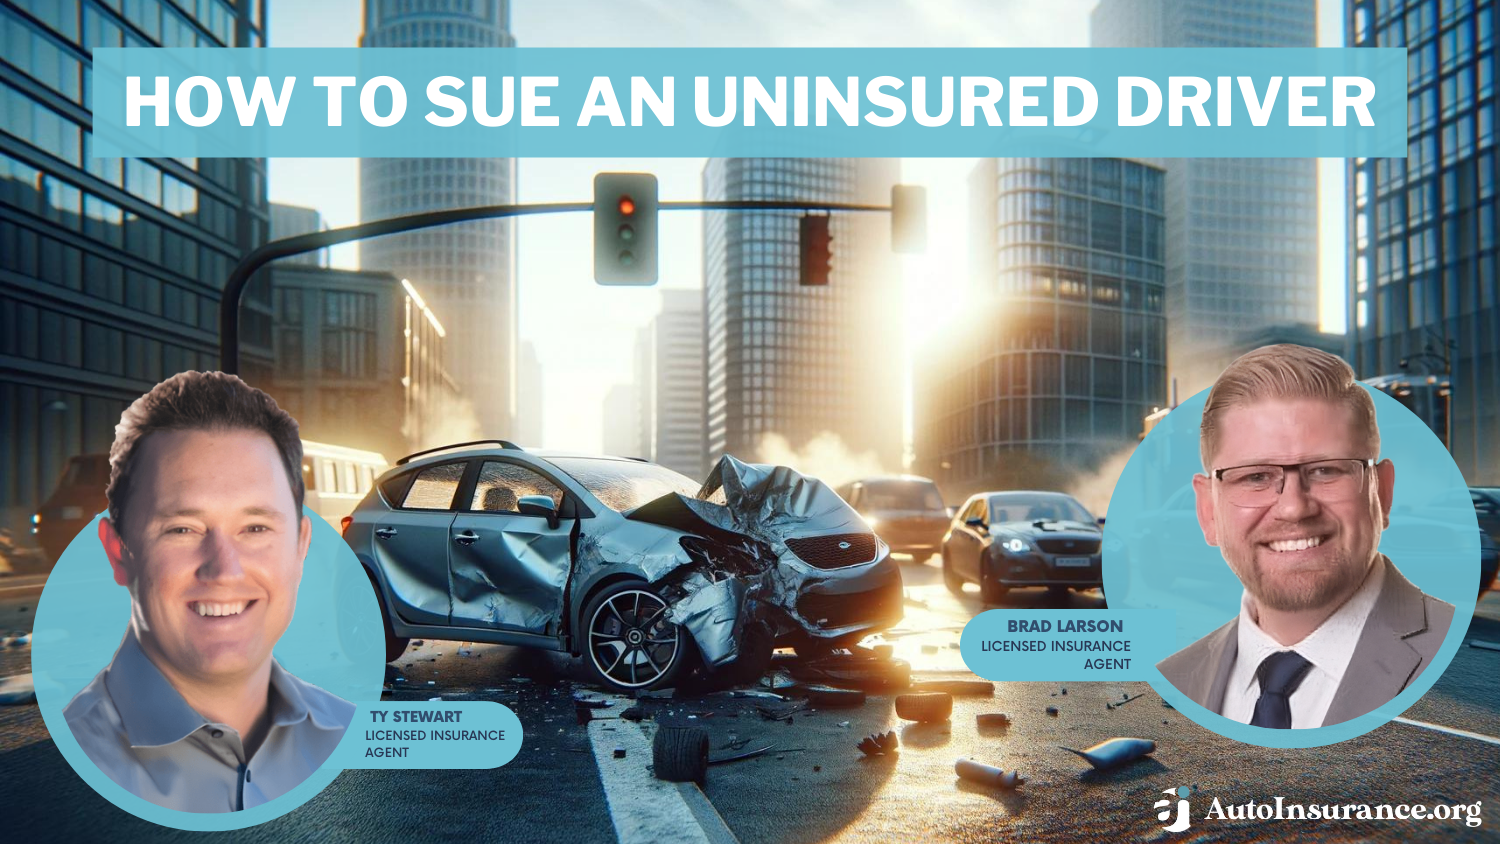 How to Sue an Uninsured Driver